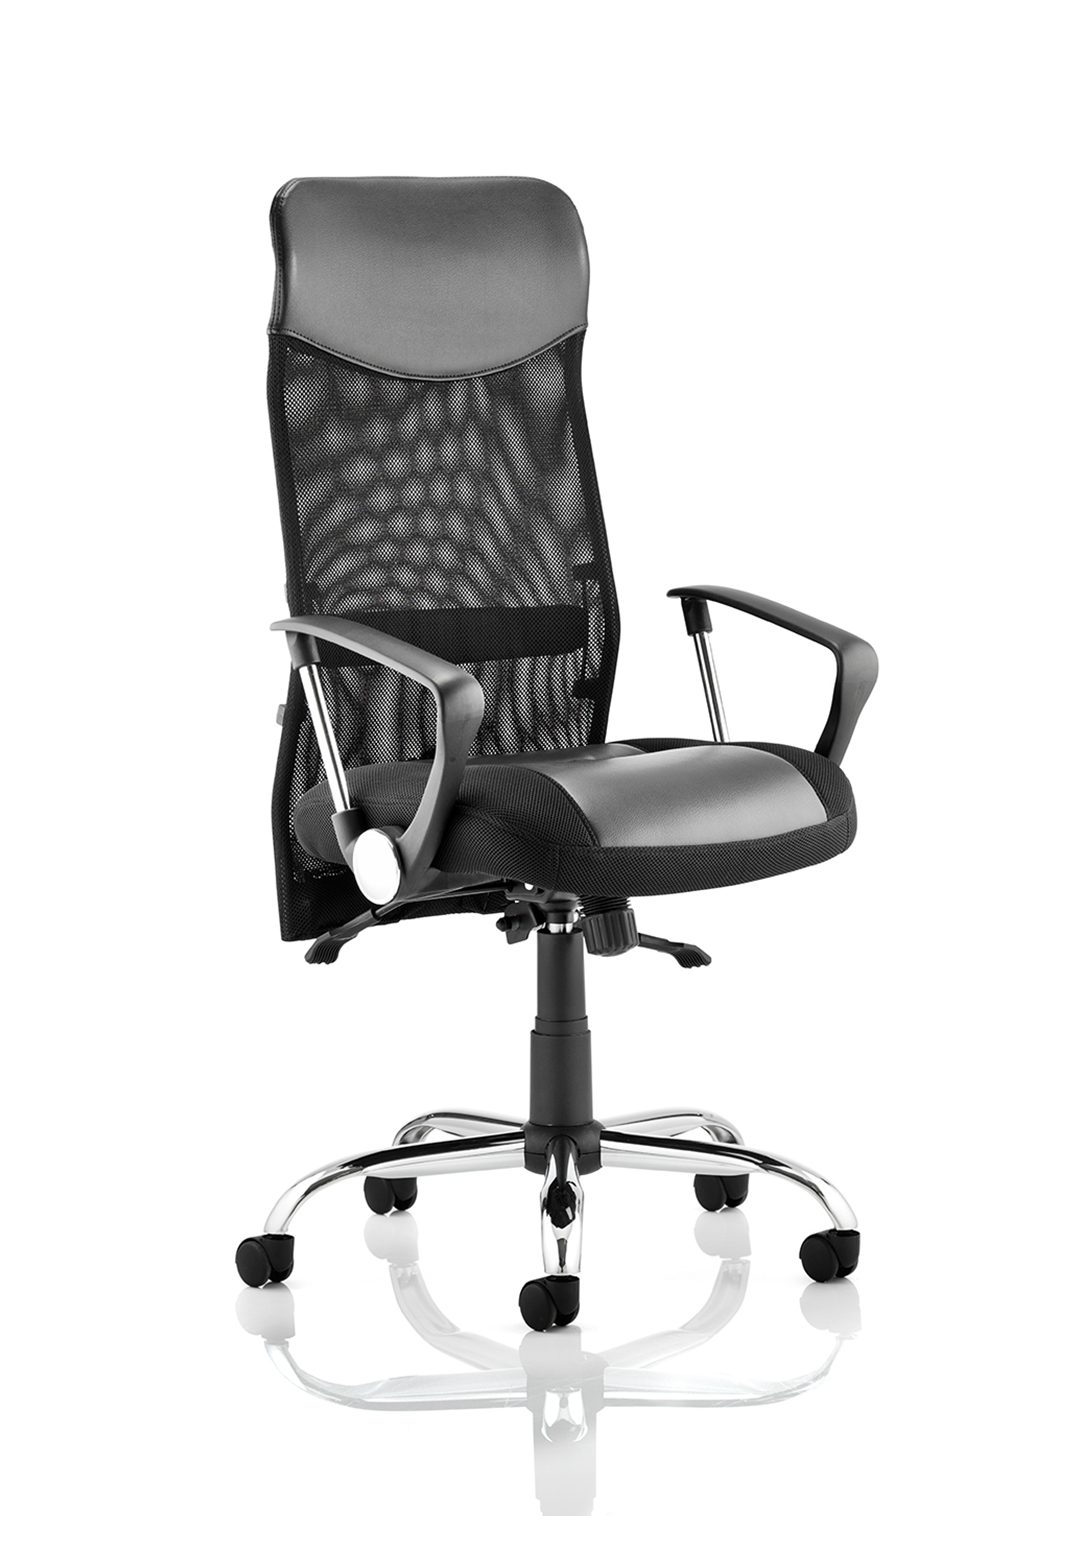 Vegas Executive Chair Black Leather Seat Black Mesh Back With Leather Headrest With Arms Image 2